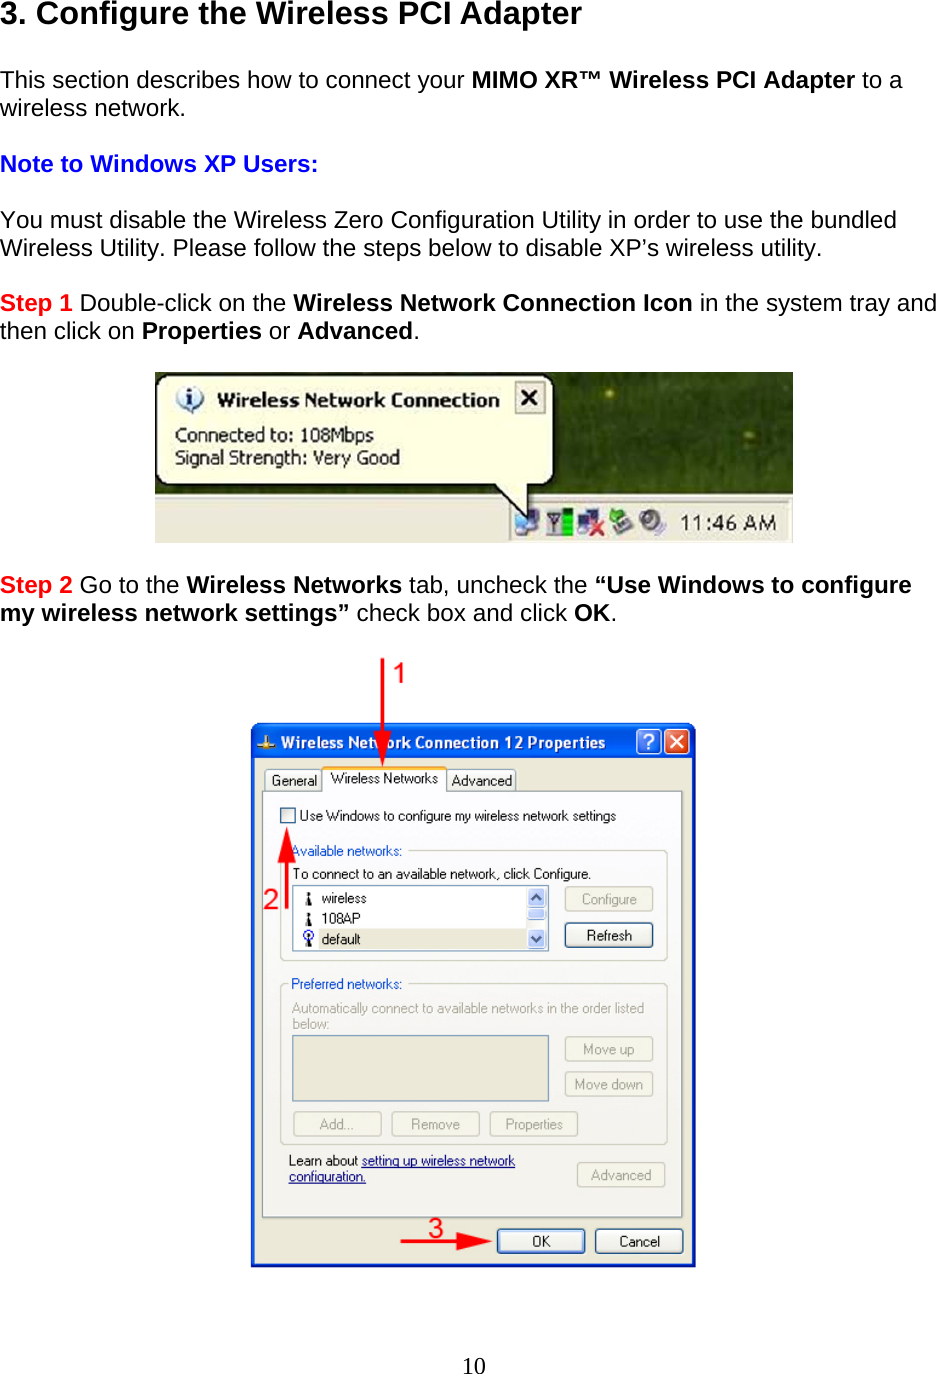 10 3. Configure the Wireless PCI Adapter  This section describes how to connect your MIMO XR™ Wireless PCI Adapter to a wireless network.  Note to Windows XP Users:  You must disable the Wireless Zero Configuration Utility in order to use the bundled Wireless Utility. Please follow the steps below to disable XP’s wireless utility.  Step 1 Double-click on the Wireless Network Connection Icon in the system tray and then click on Properties or Advanced.    Step 2 Go to the Wireless Networks tab, uncheck the “Use Windows to configure my wireless network settings” check box and click OK.    